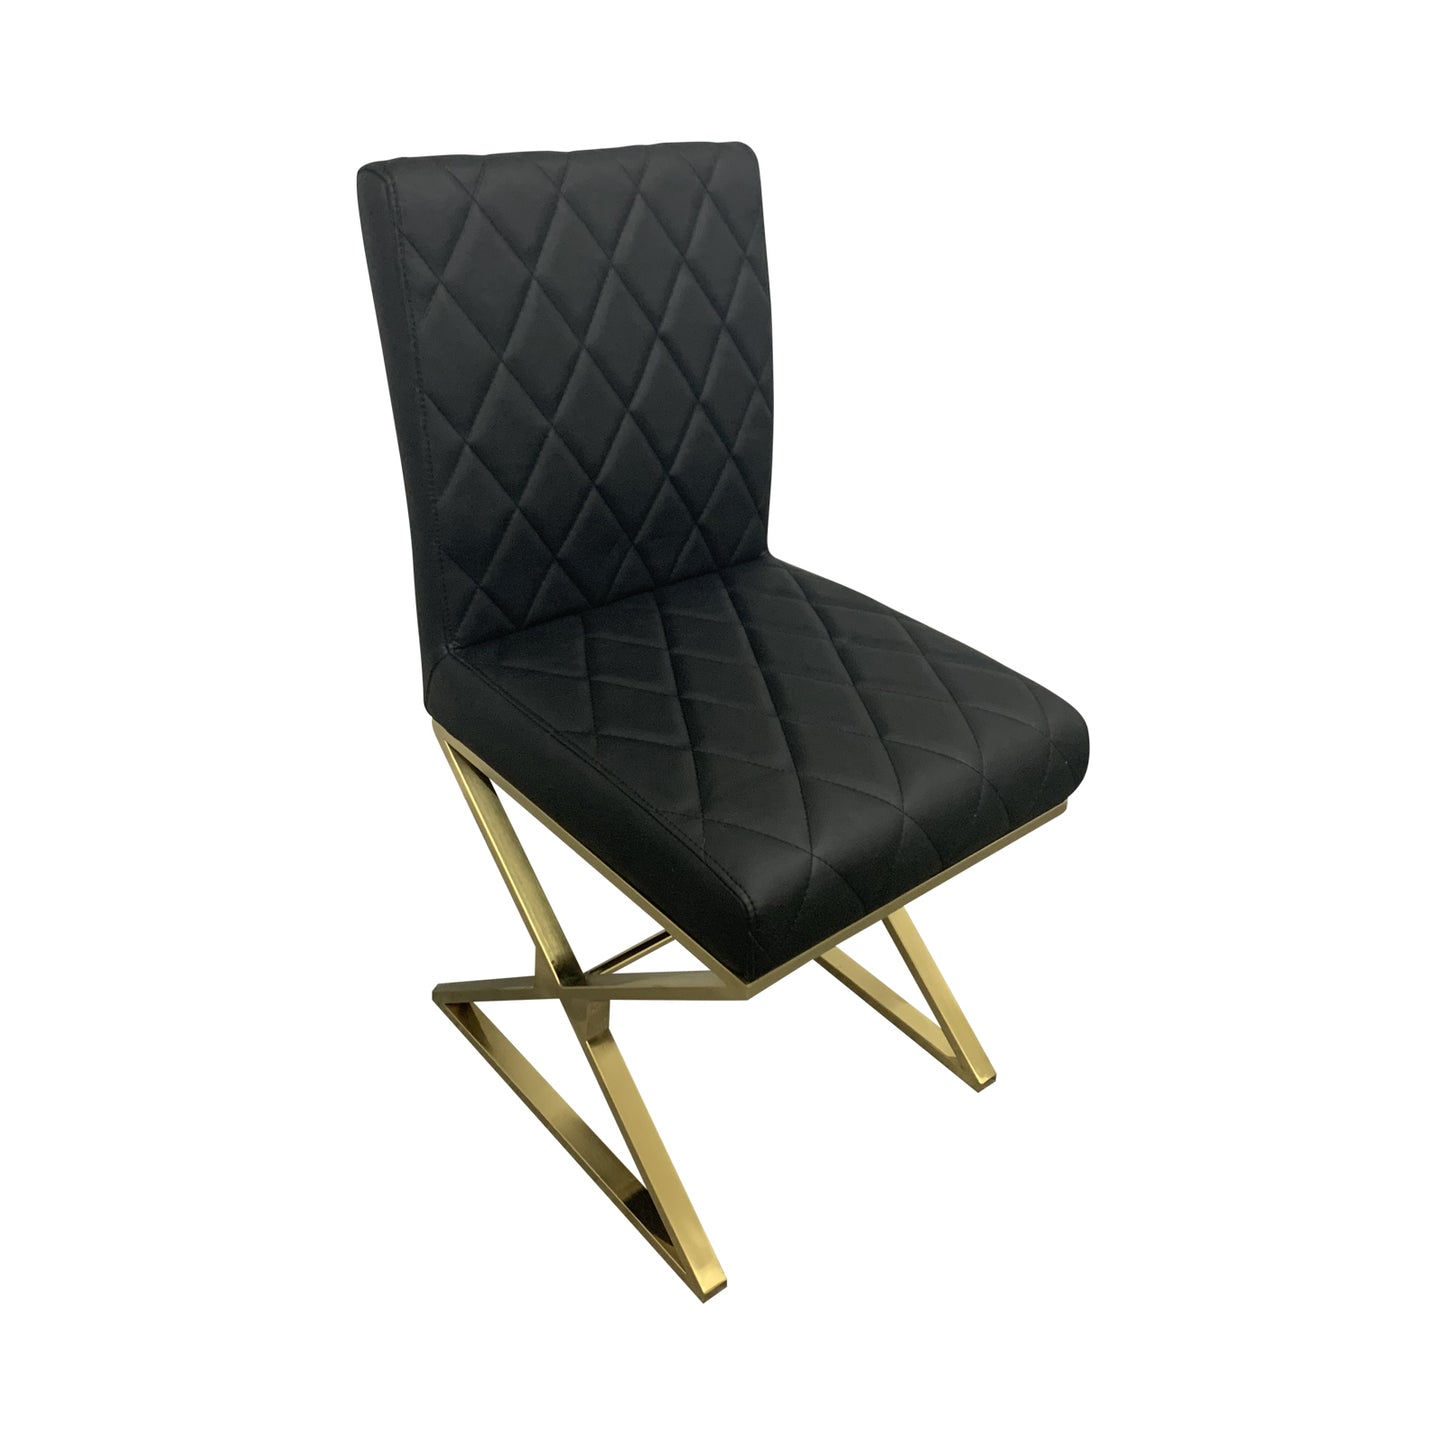 2X Dining Chair Stainless Gold Frame & Seat Black PU Leather - image1